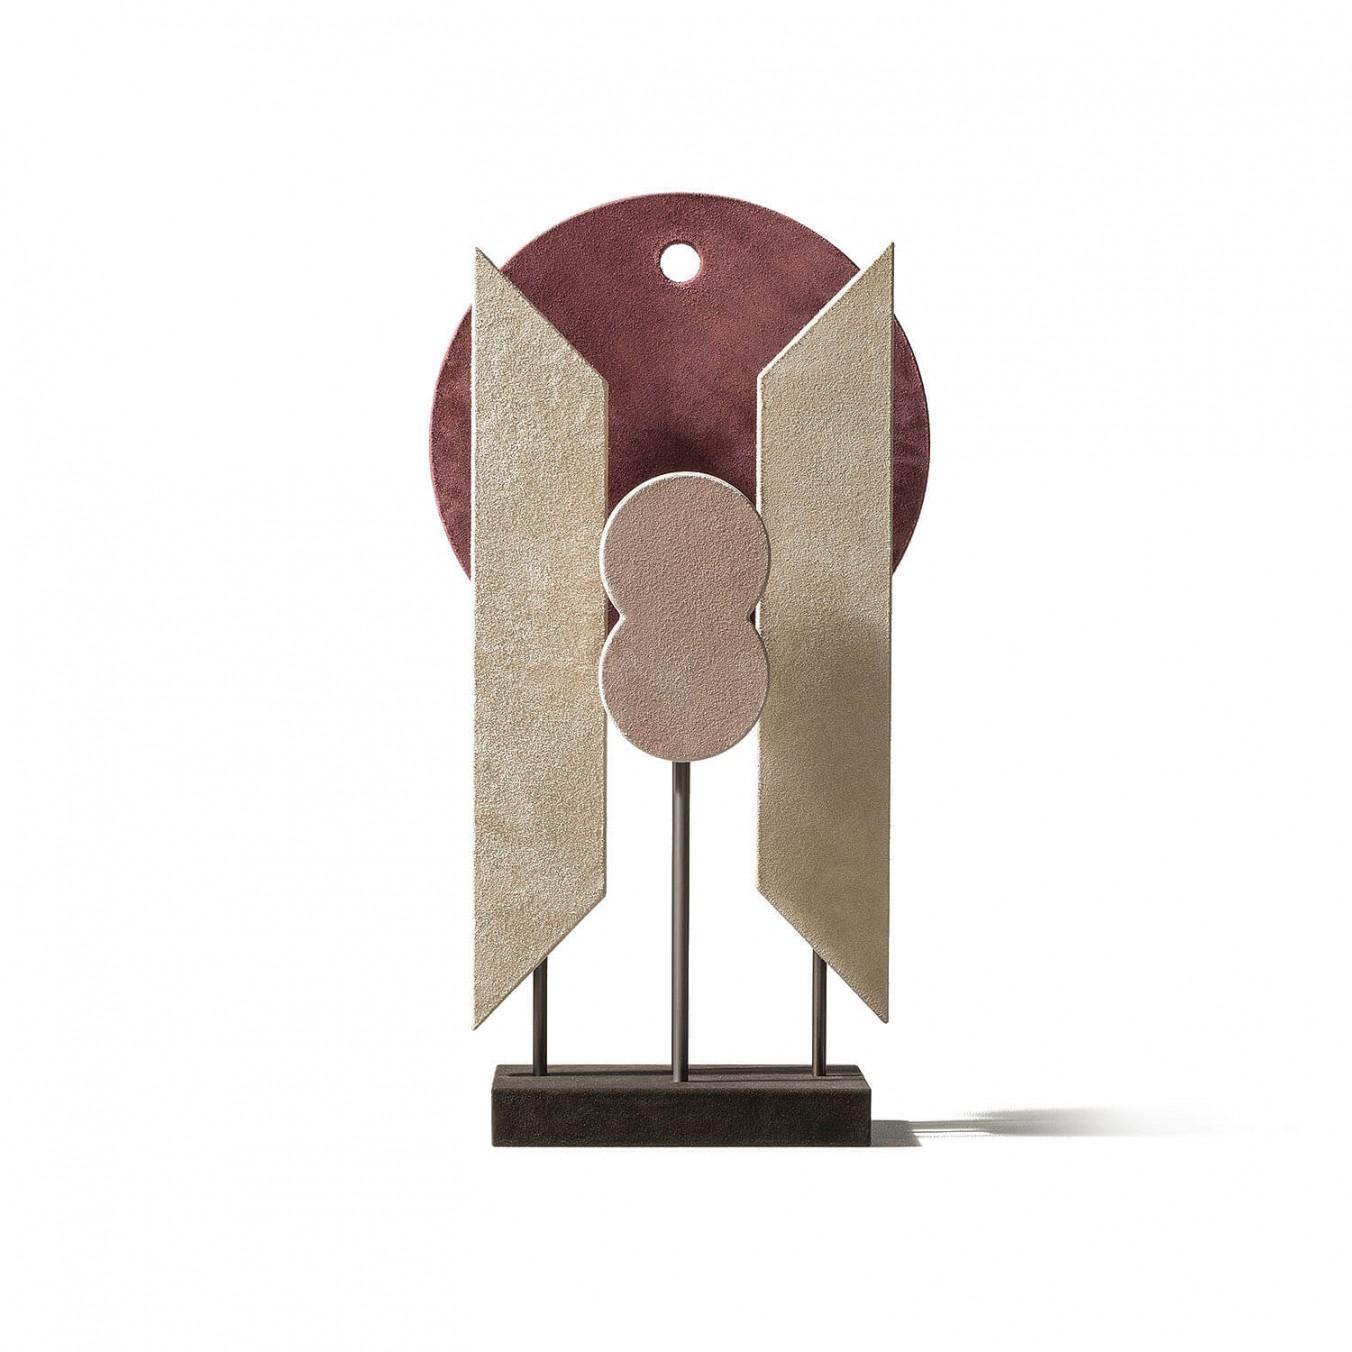 Italian Contemporary Leather Sculpture, Tabou 2 by Stephane Parmentier for Giobagnara For Sale